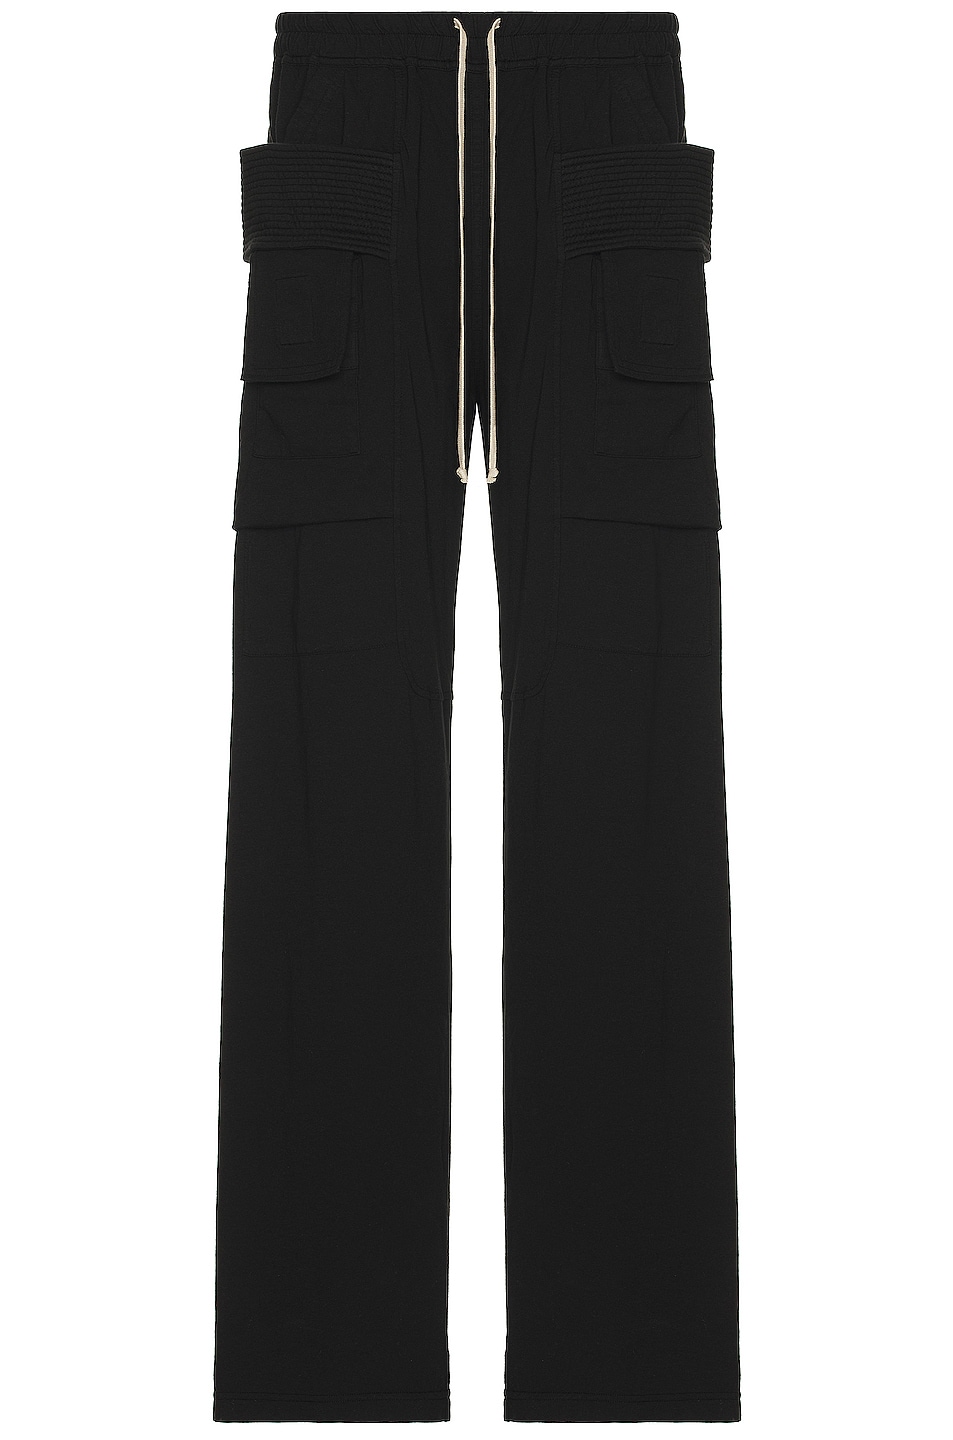 Image 1 of DRKSHDW by Rick Owens Creatch Cargo Drawstring Pants in Black